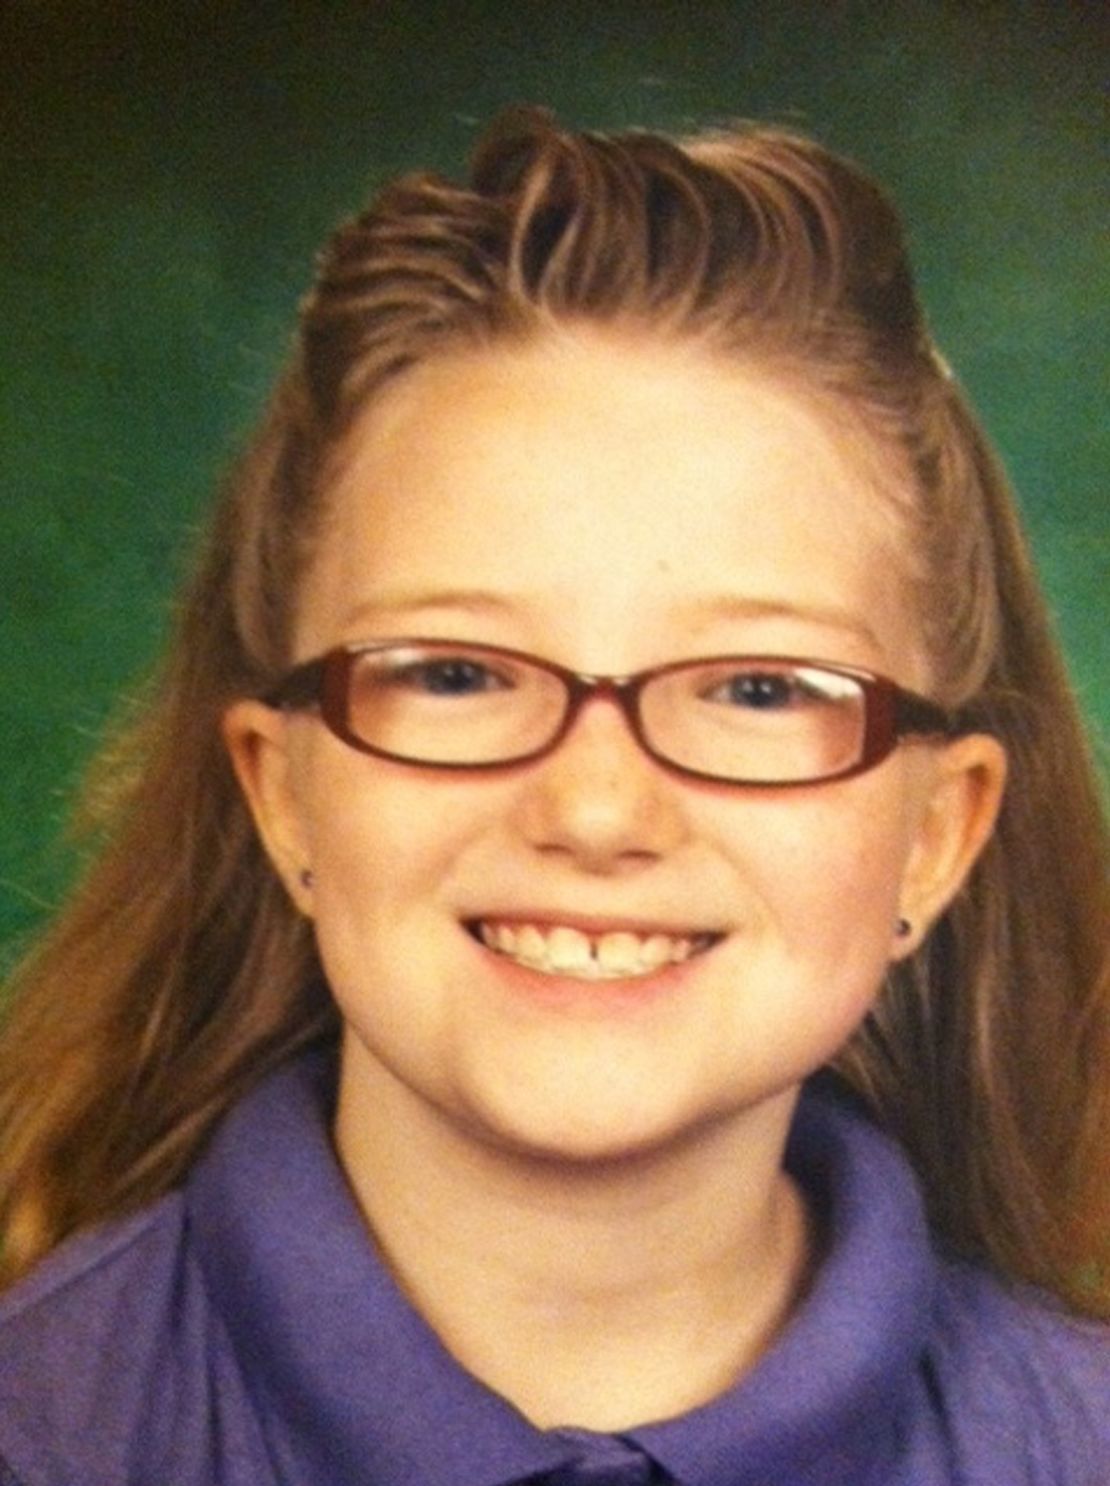 Jessica Ridgeway, 10, was last seen by her mother as she left for school in Westminster, Colorado.